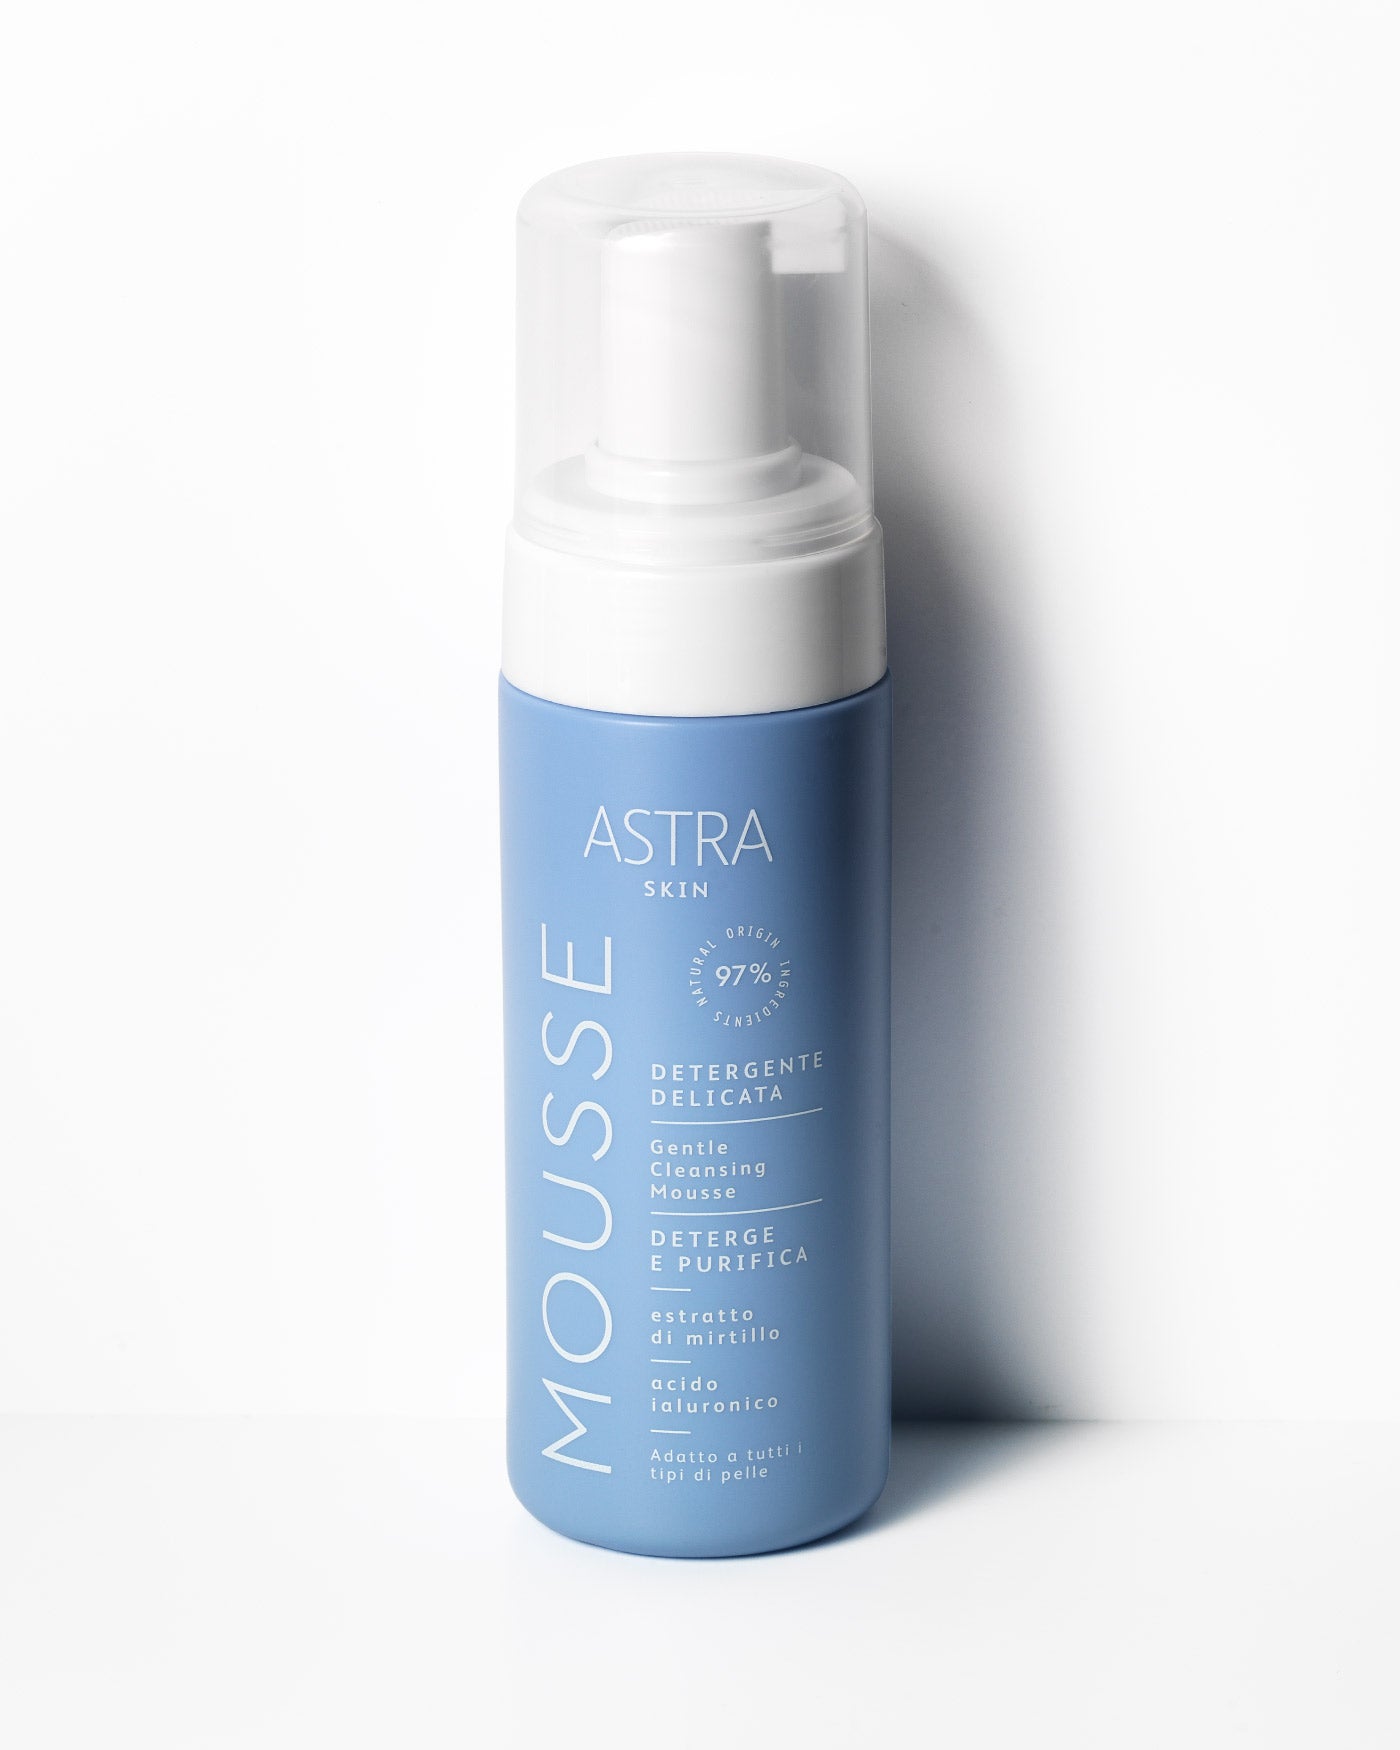 MOUSSE DETERGENTE DELICATA - Cleansing - Astra Make-Up